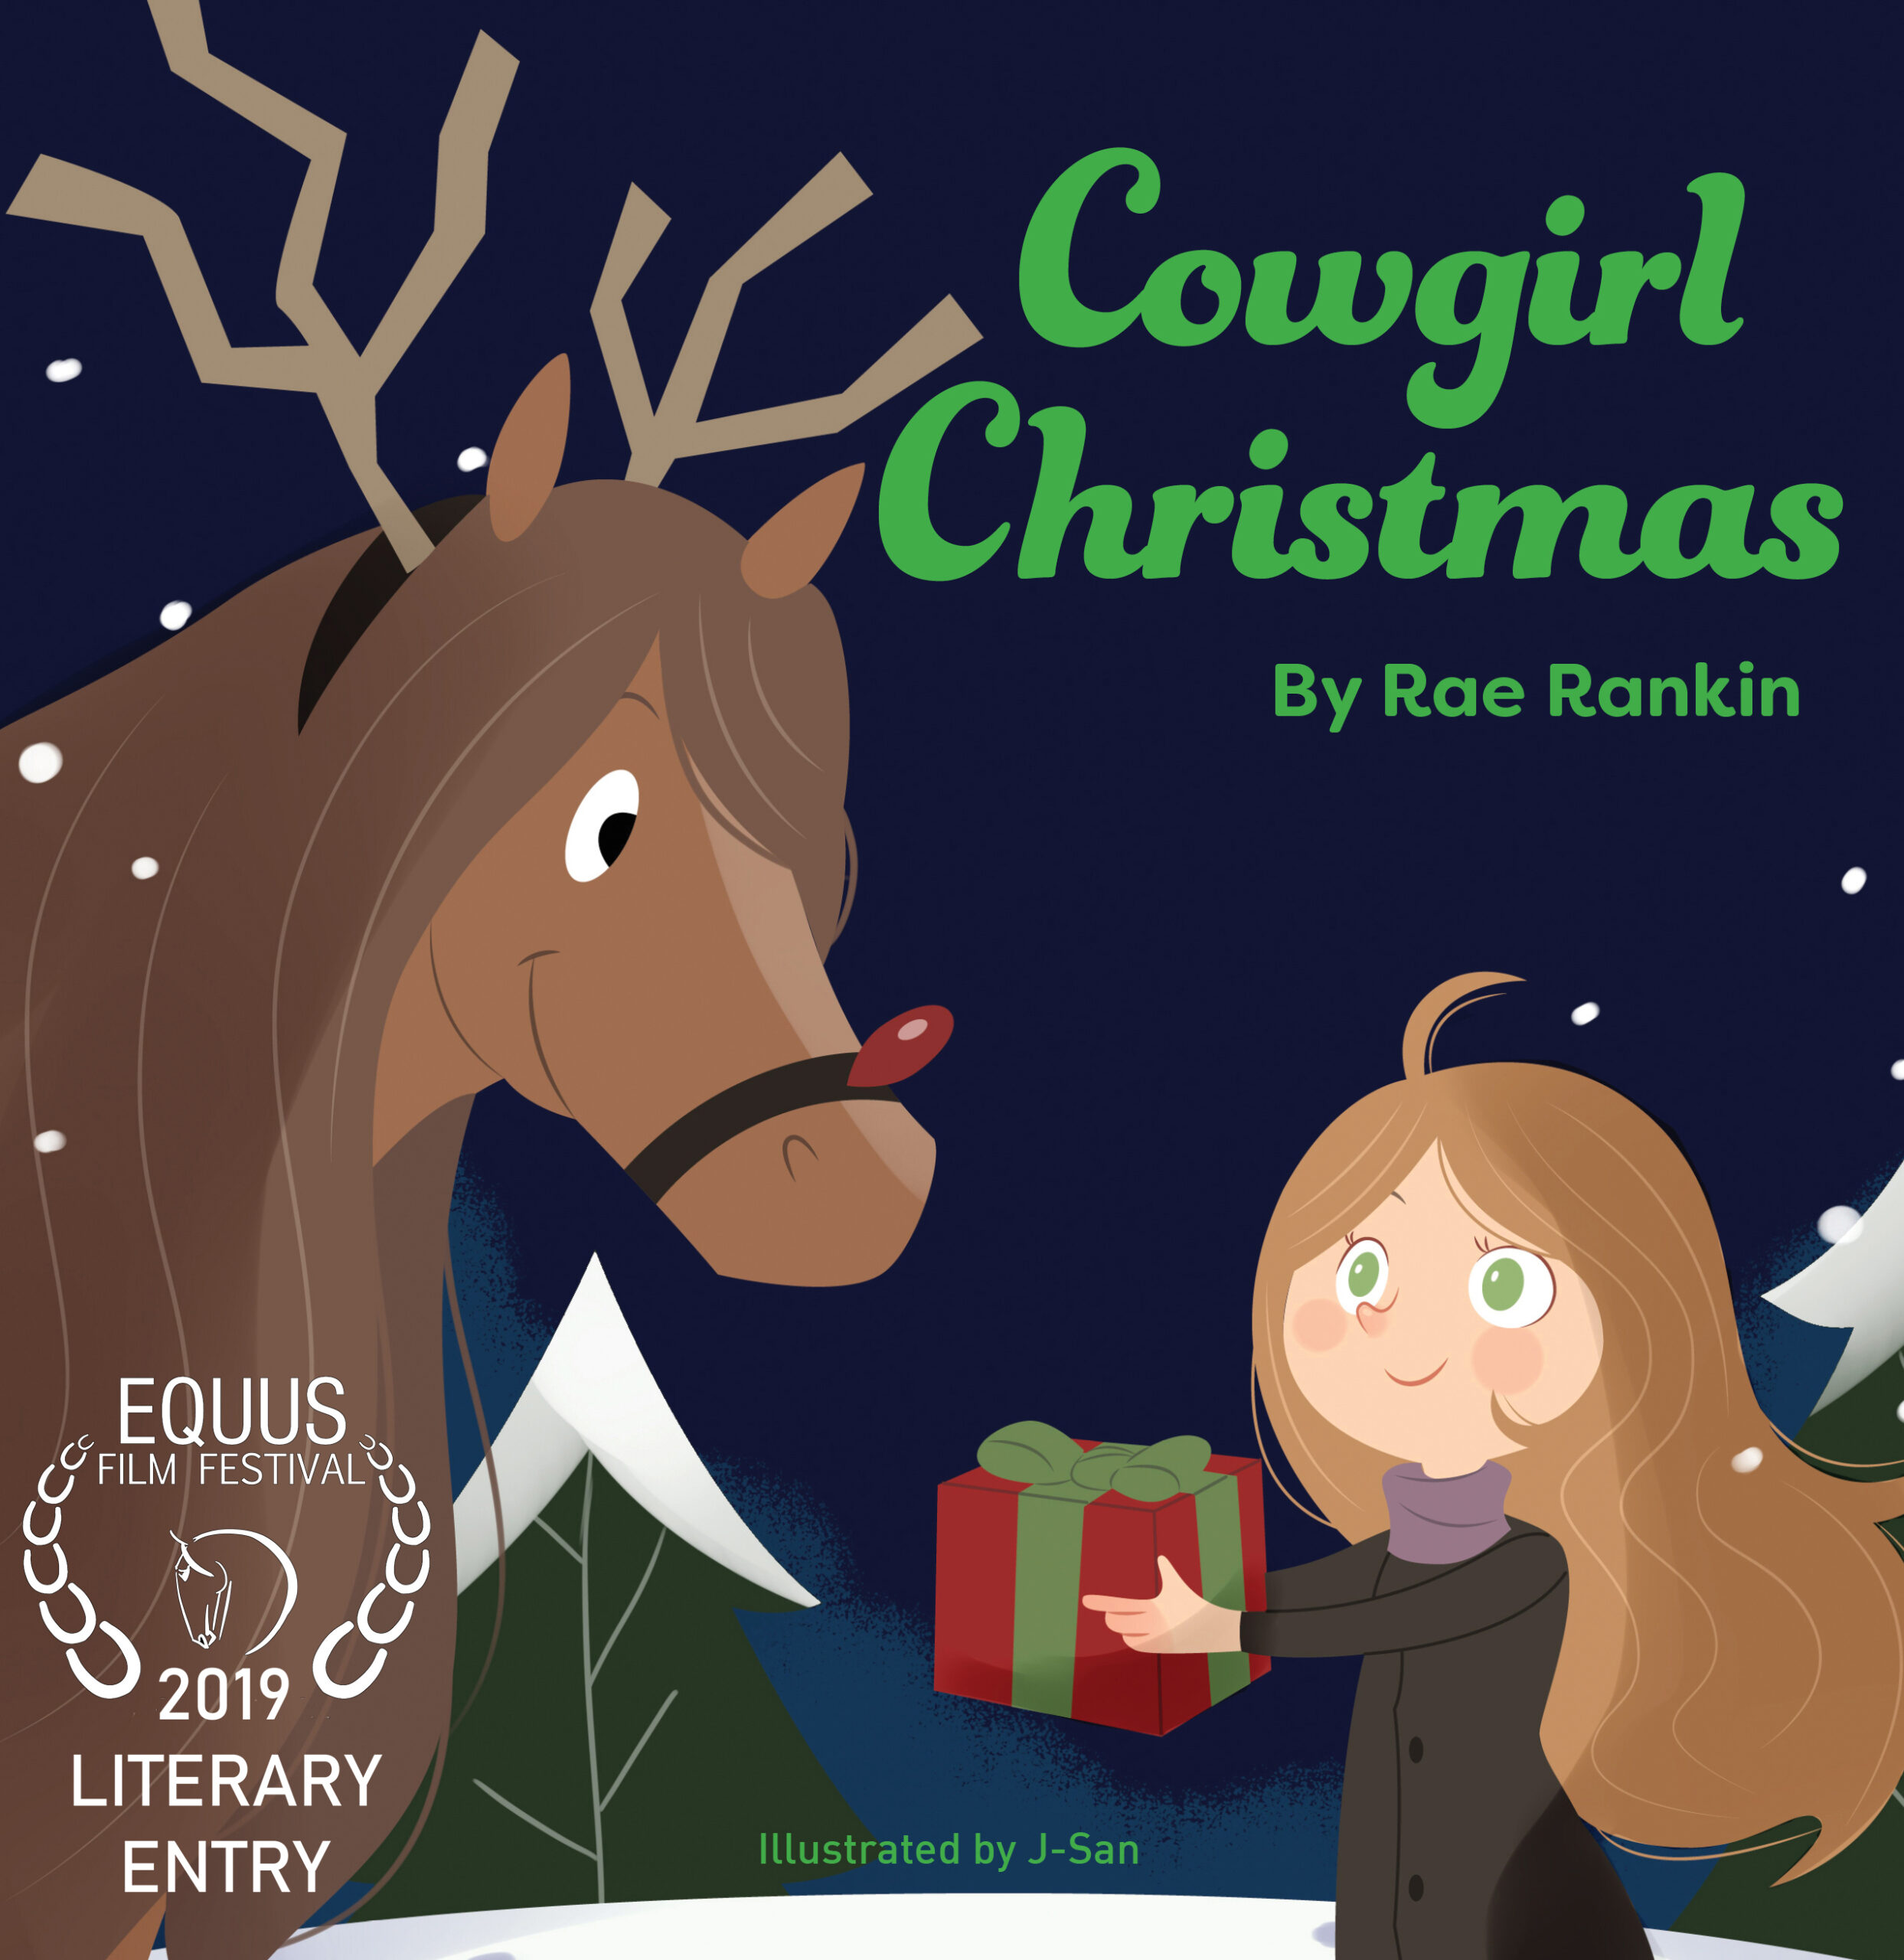 The cover of Cowgirl Christmas. A little girl holding a present and a chestnut horse dressed up as Rudolph the reindeer.